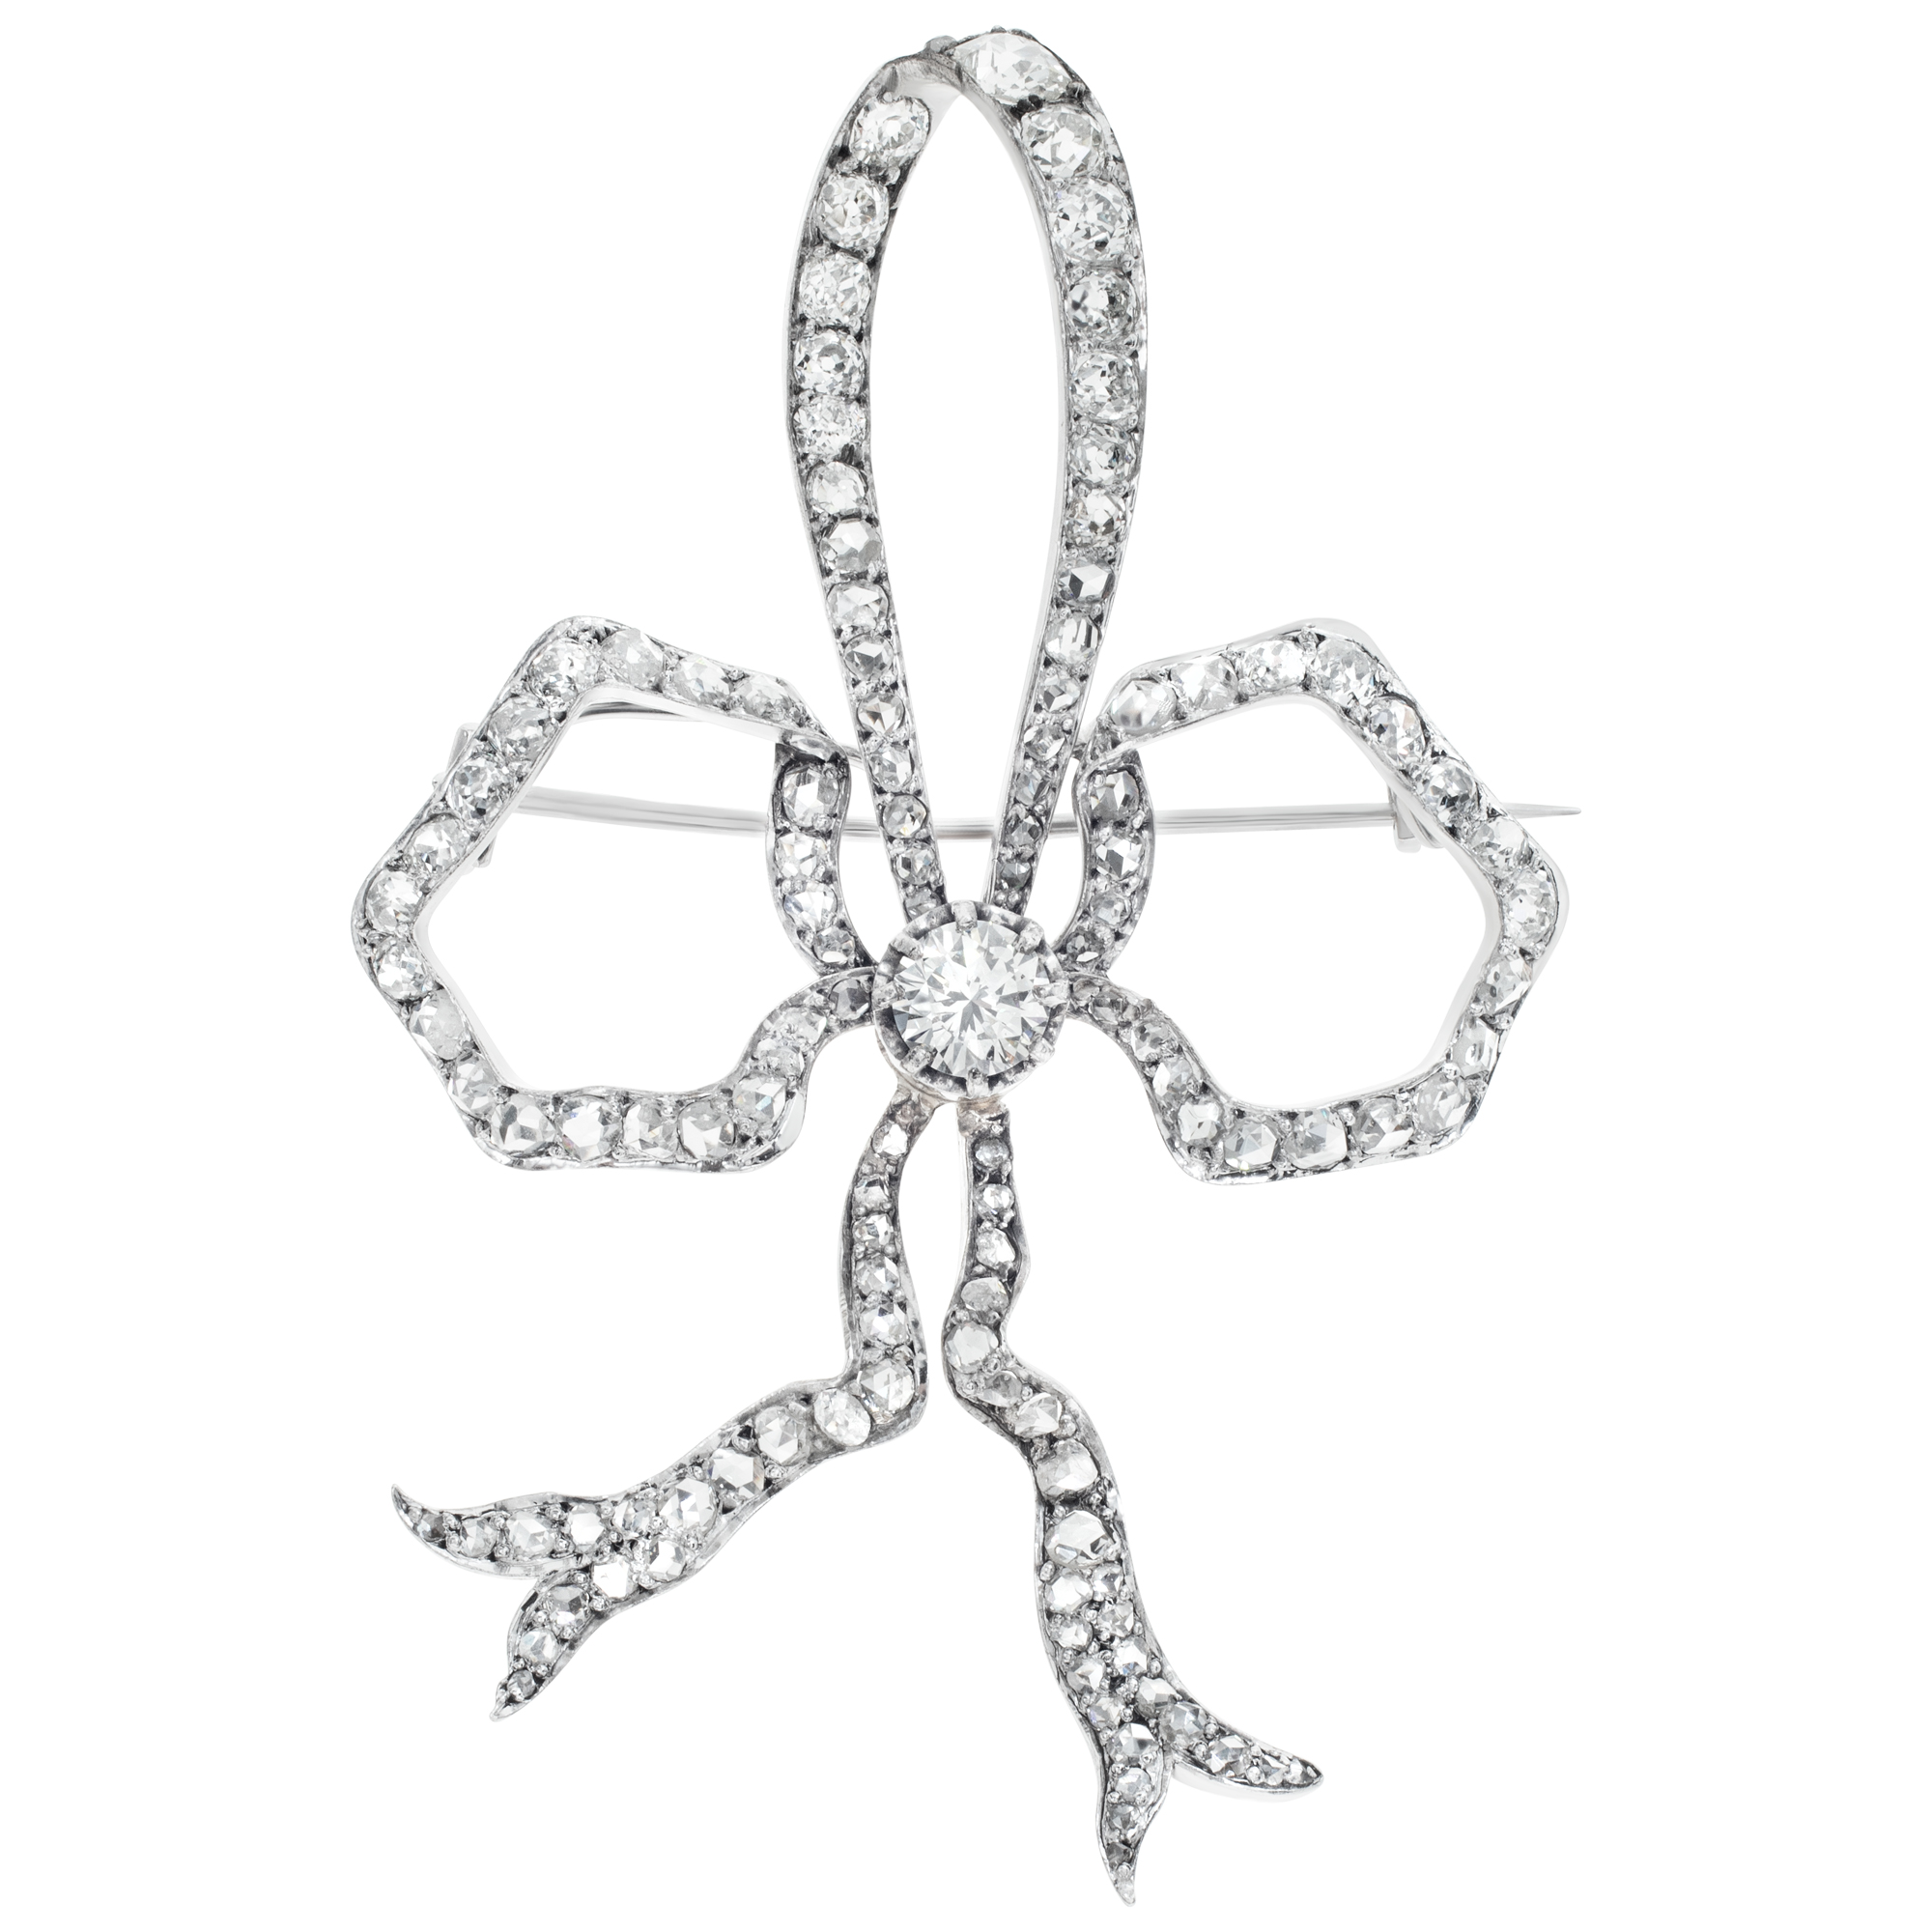 Diamond brooch in 18k white gold with 1 ct center rose cut diamond image 1